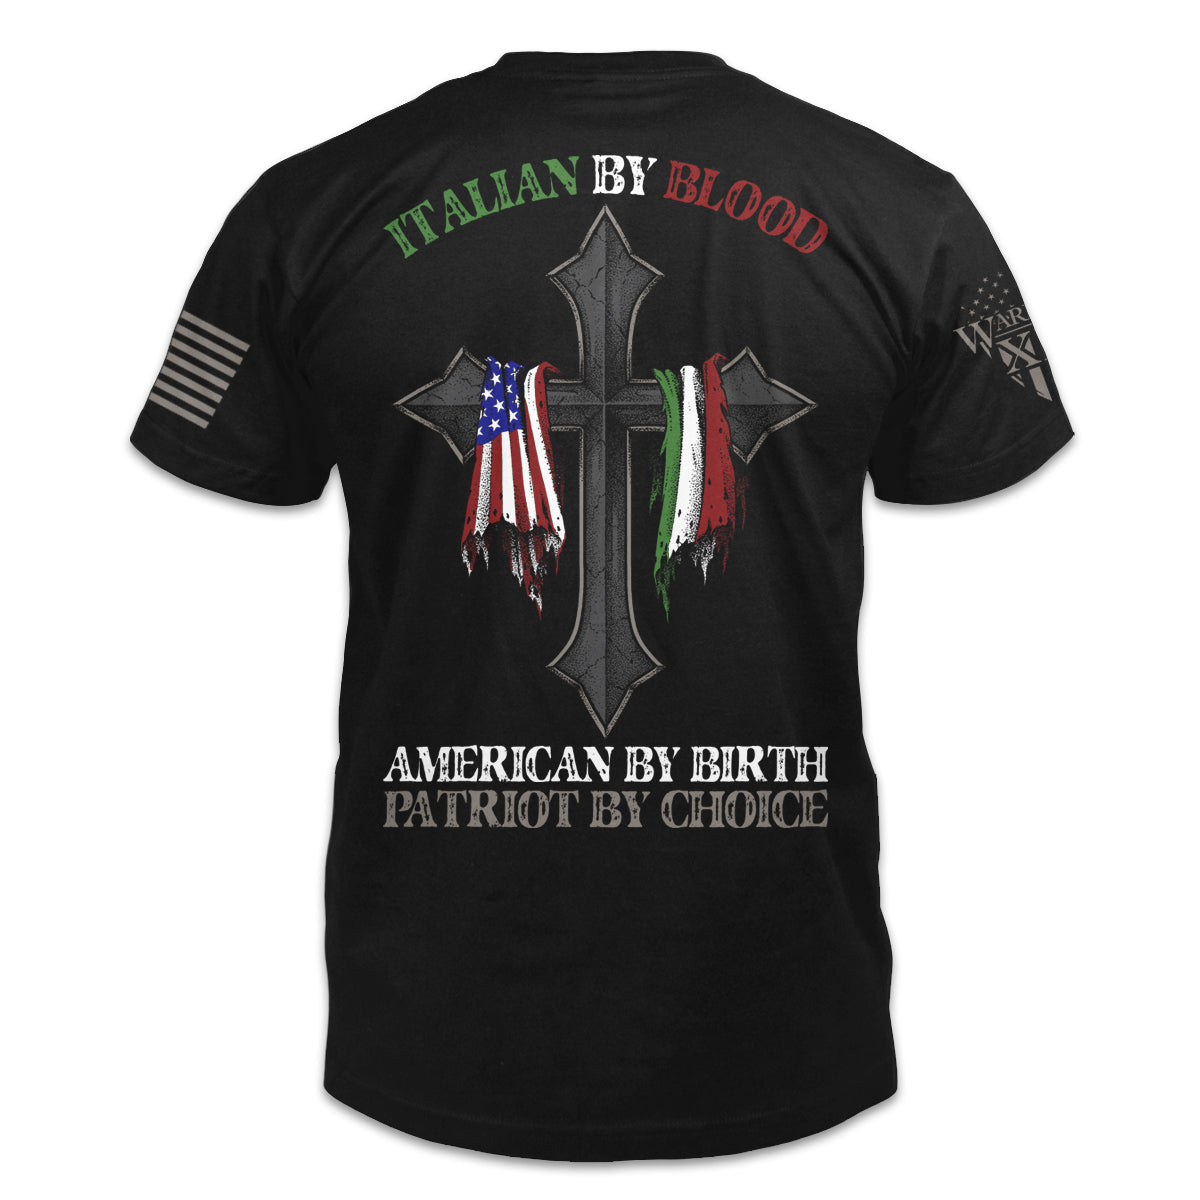 A black t-shirt with the words "Italian by blood, American by birth, patriot by choice" with a cross holding the American and Italian flag printed on the back of the shirt.